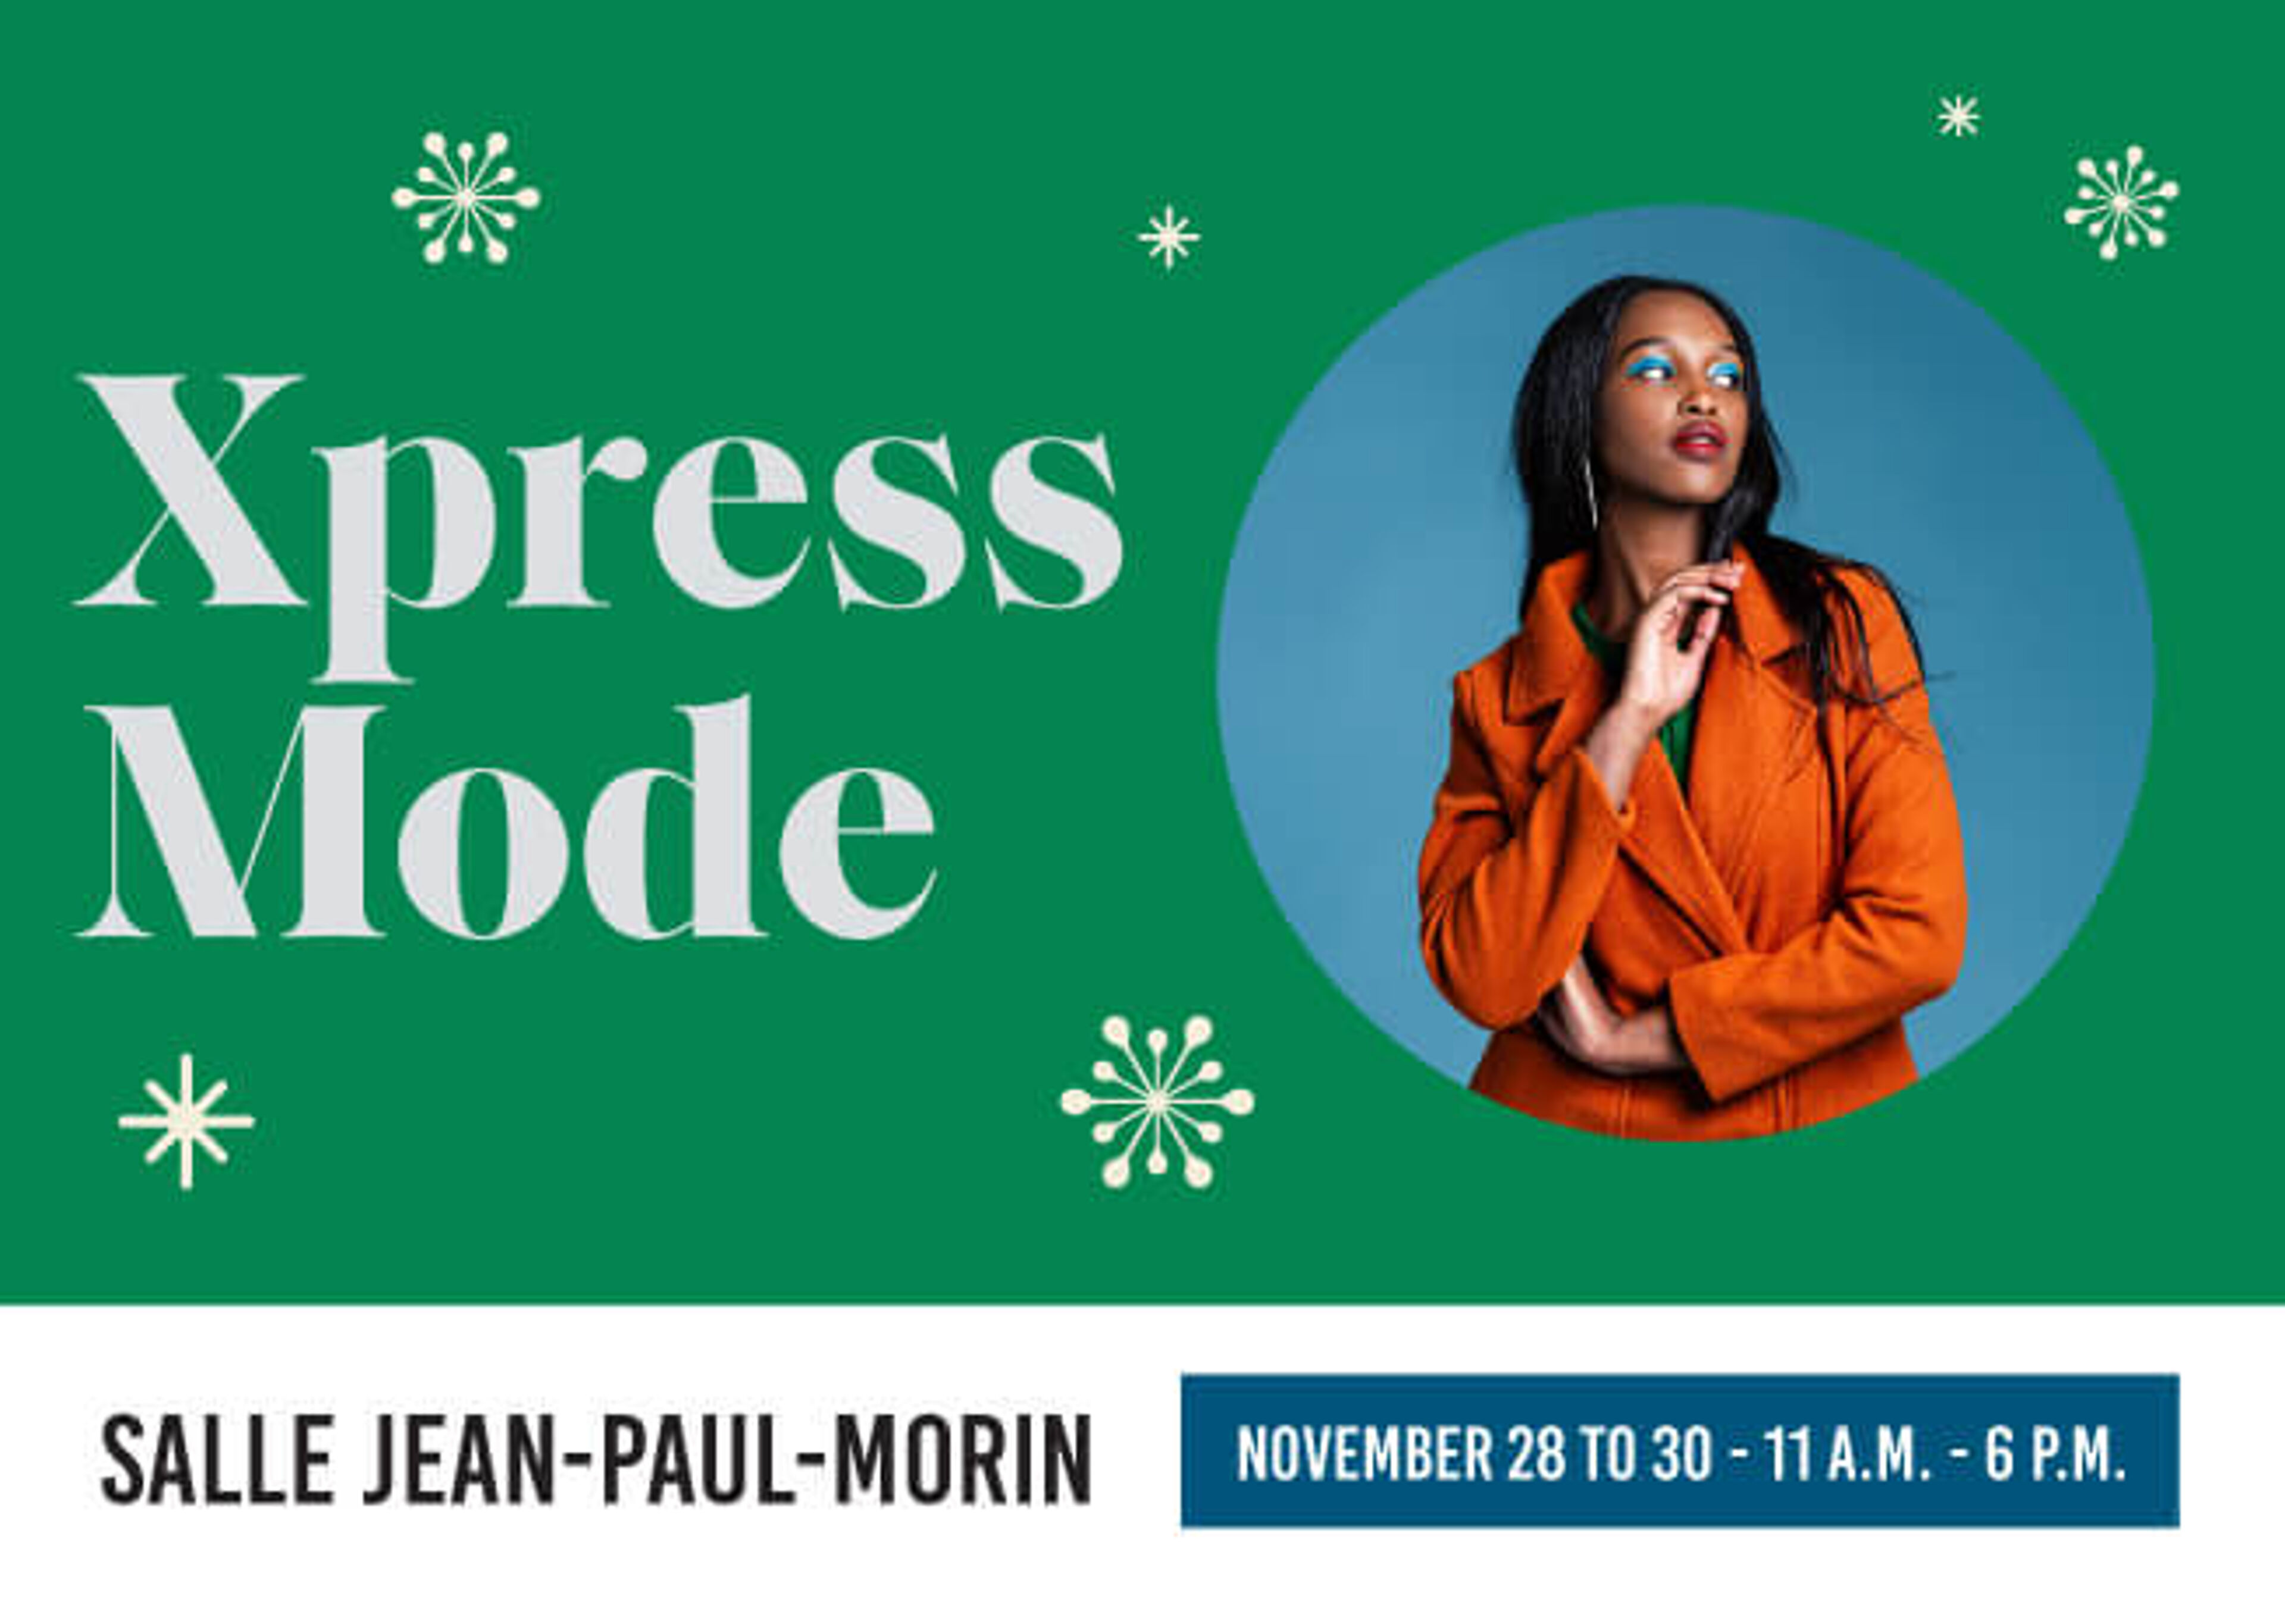 Flyer for 'Xpress Mode' fashion event at Salle Jean-Paul-Morin, November 28 to 30, from 11 A.M. to 6 P.M.